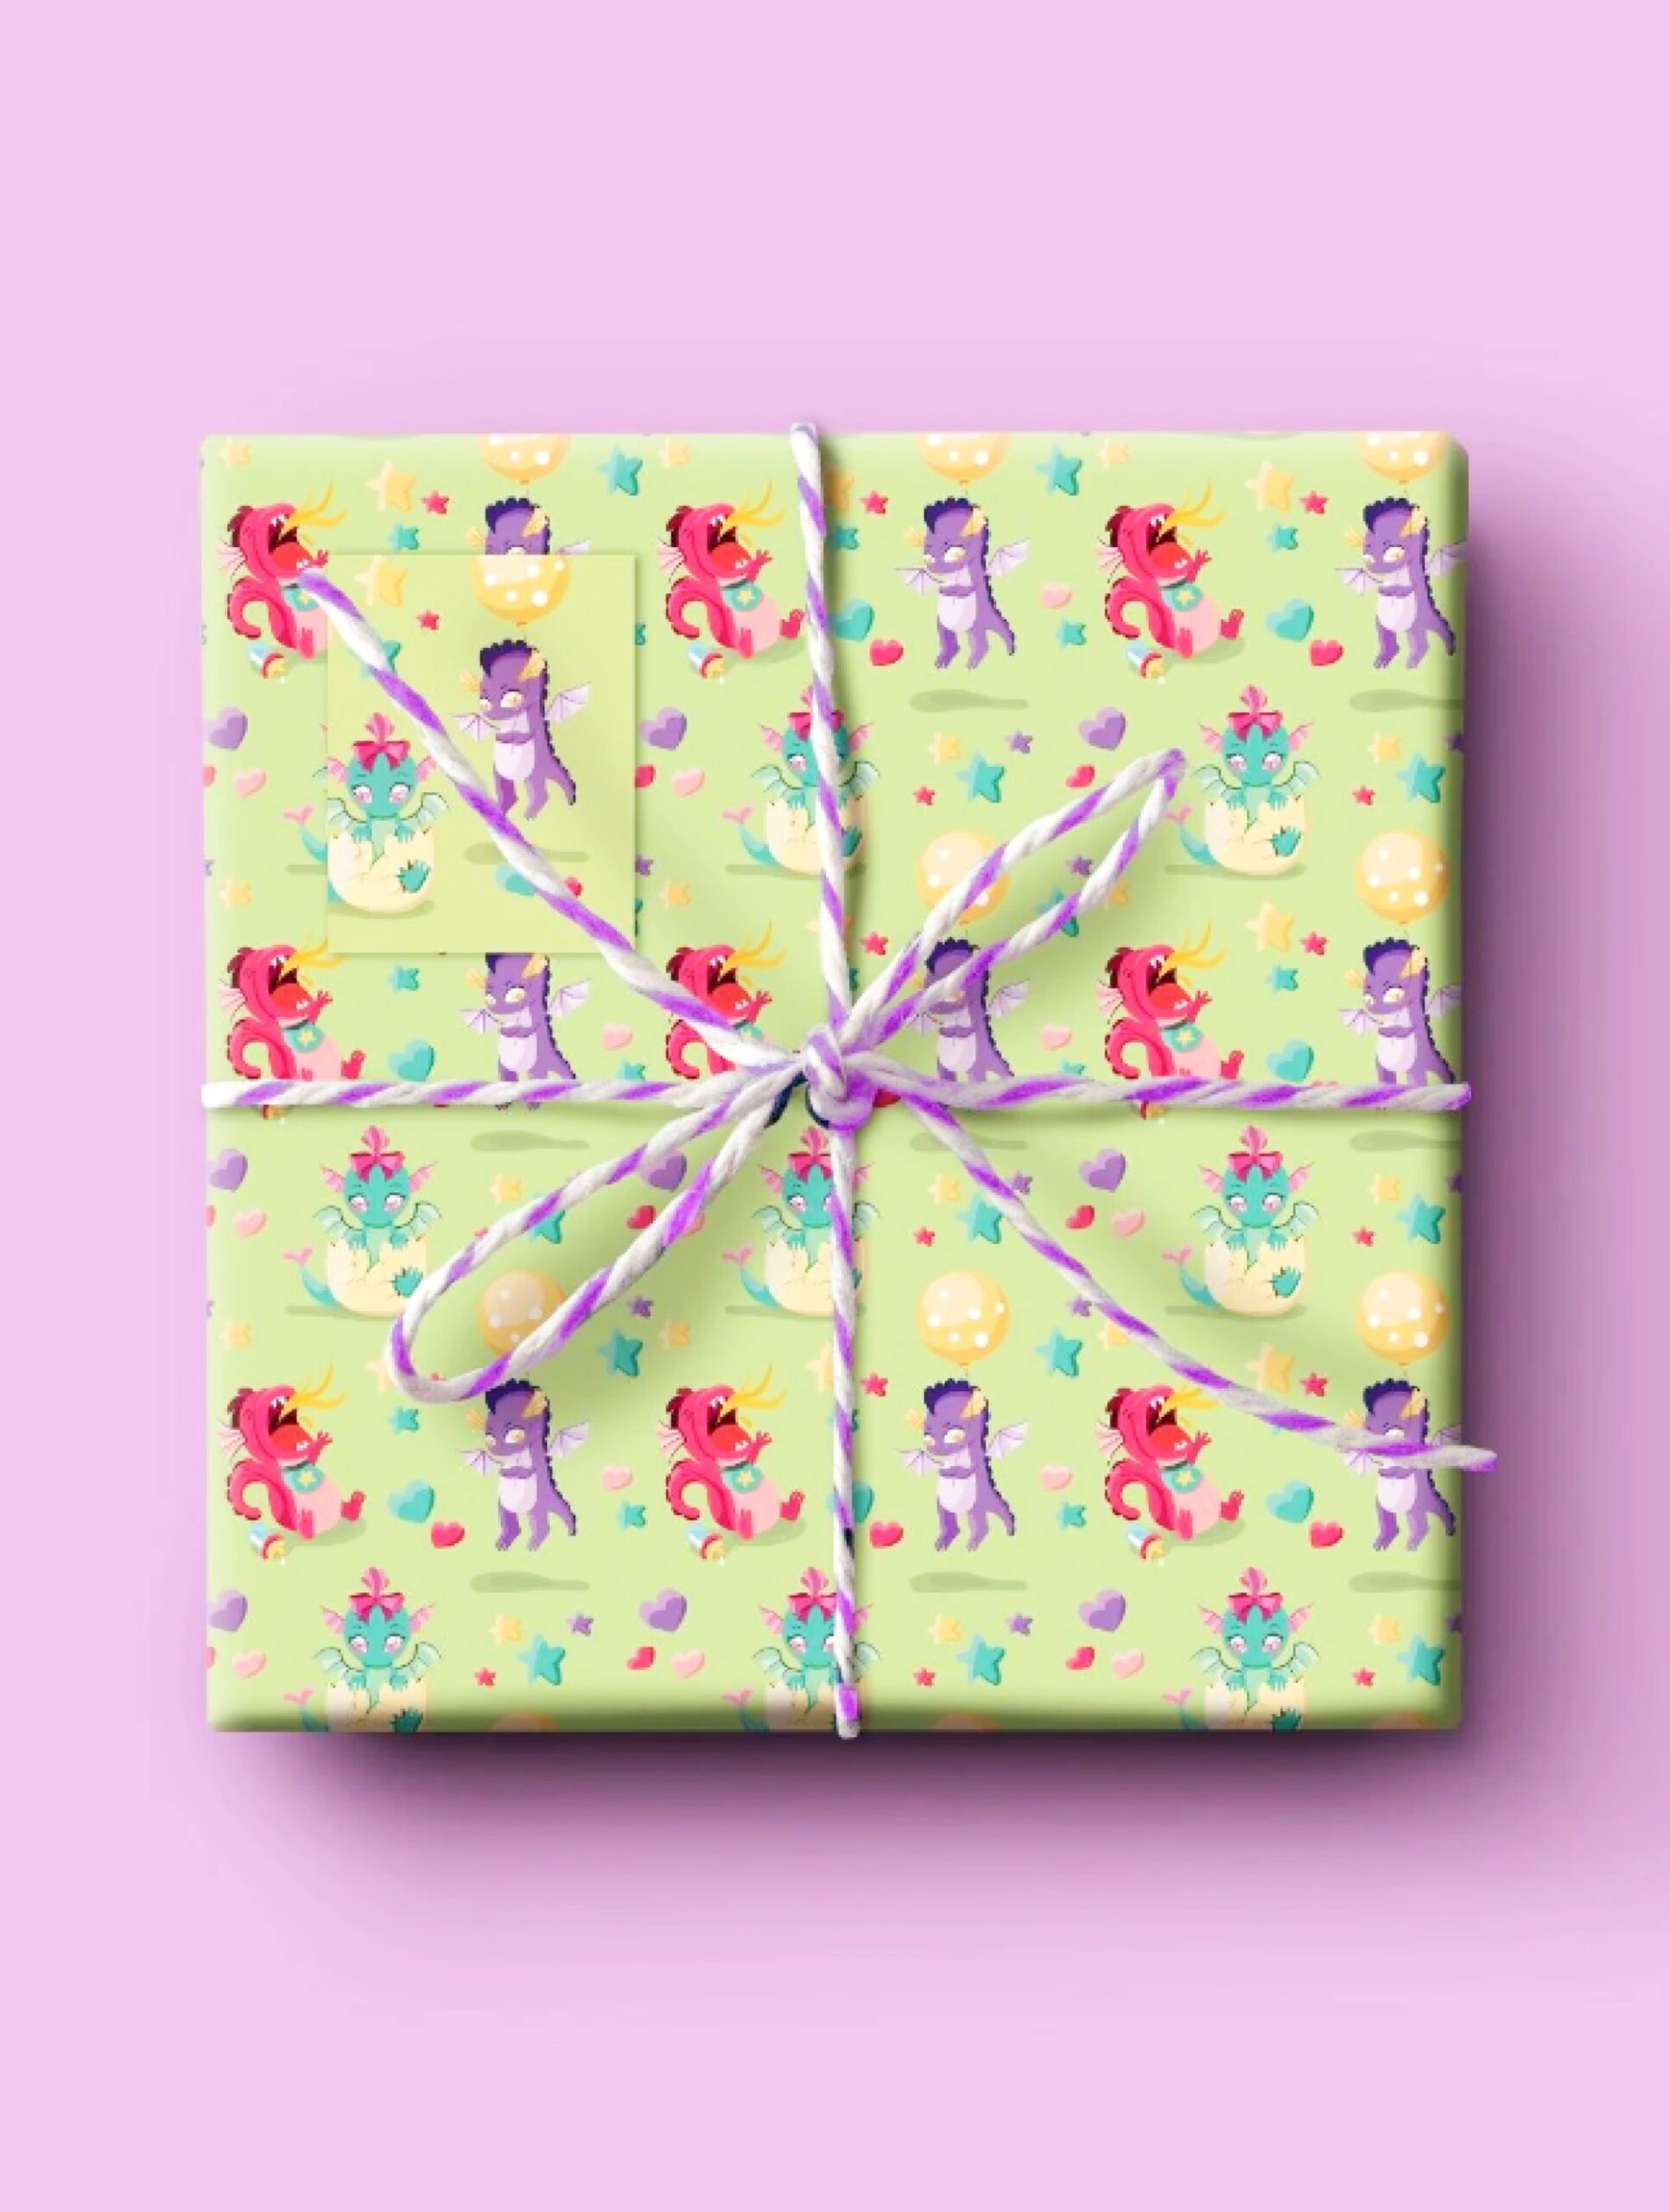 <img src="curlicue.jpg" alt="curlicue baby dragon wrapping paper"/>